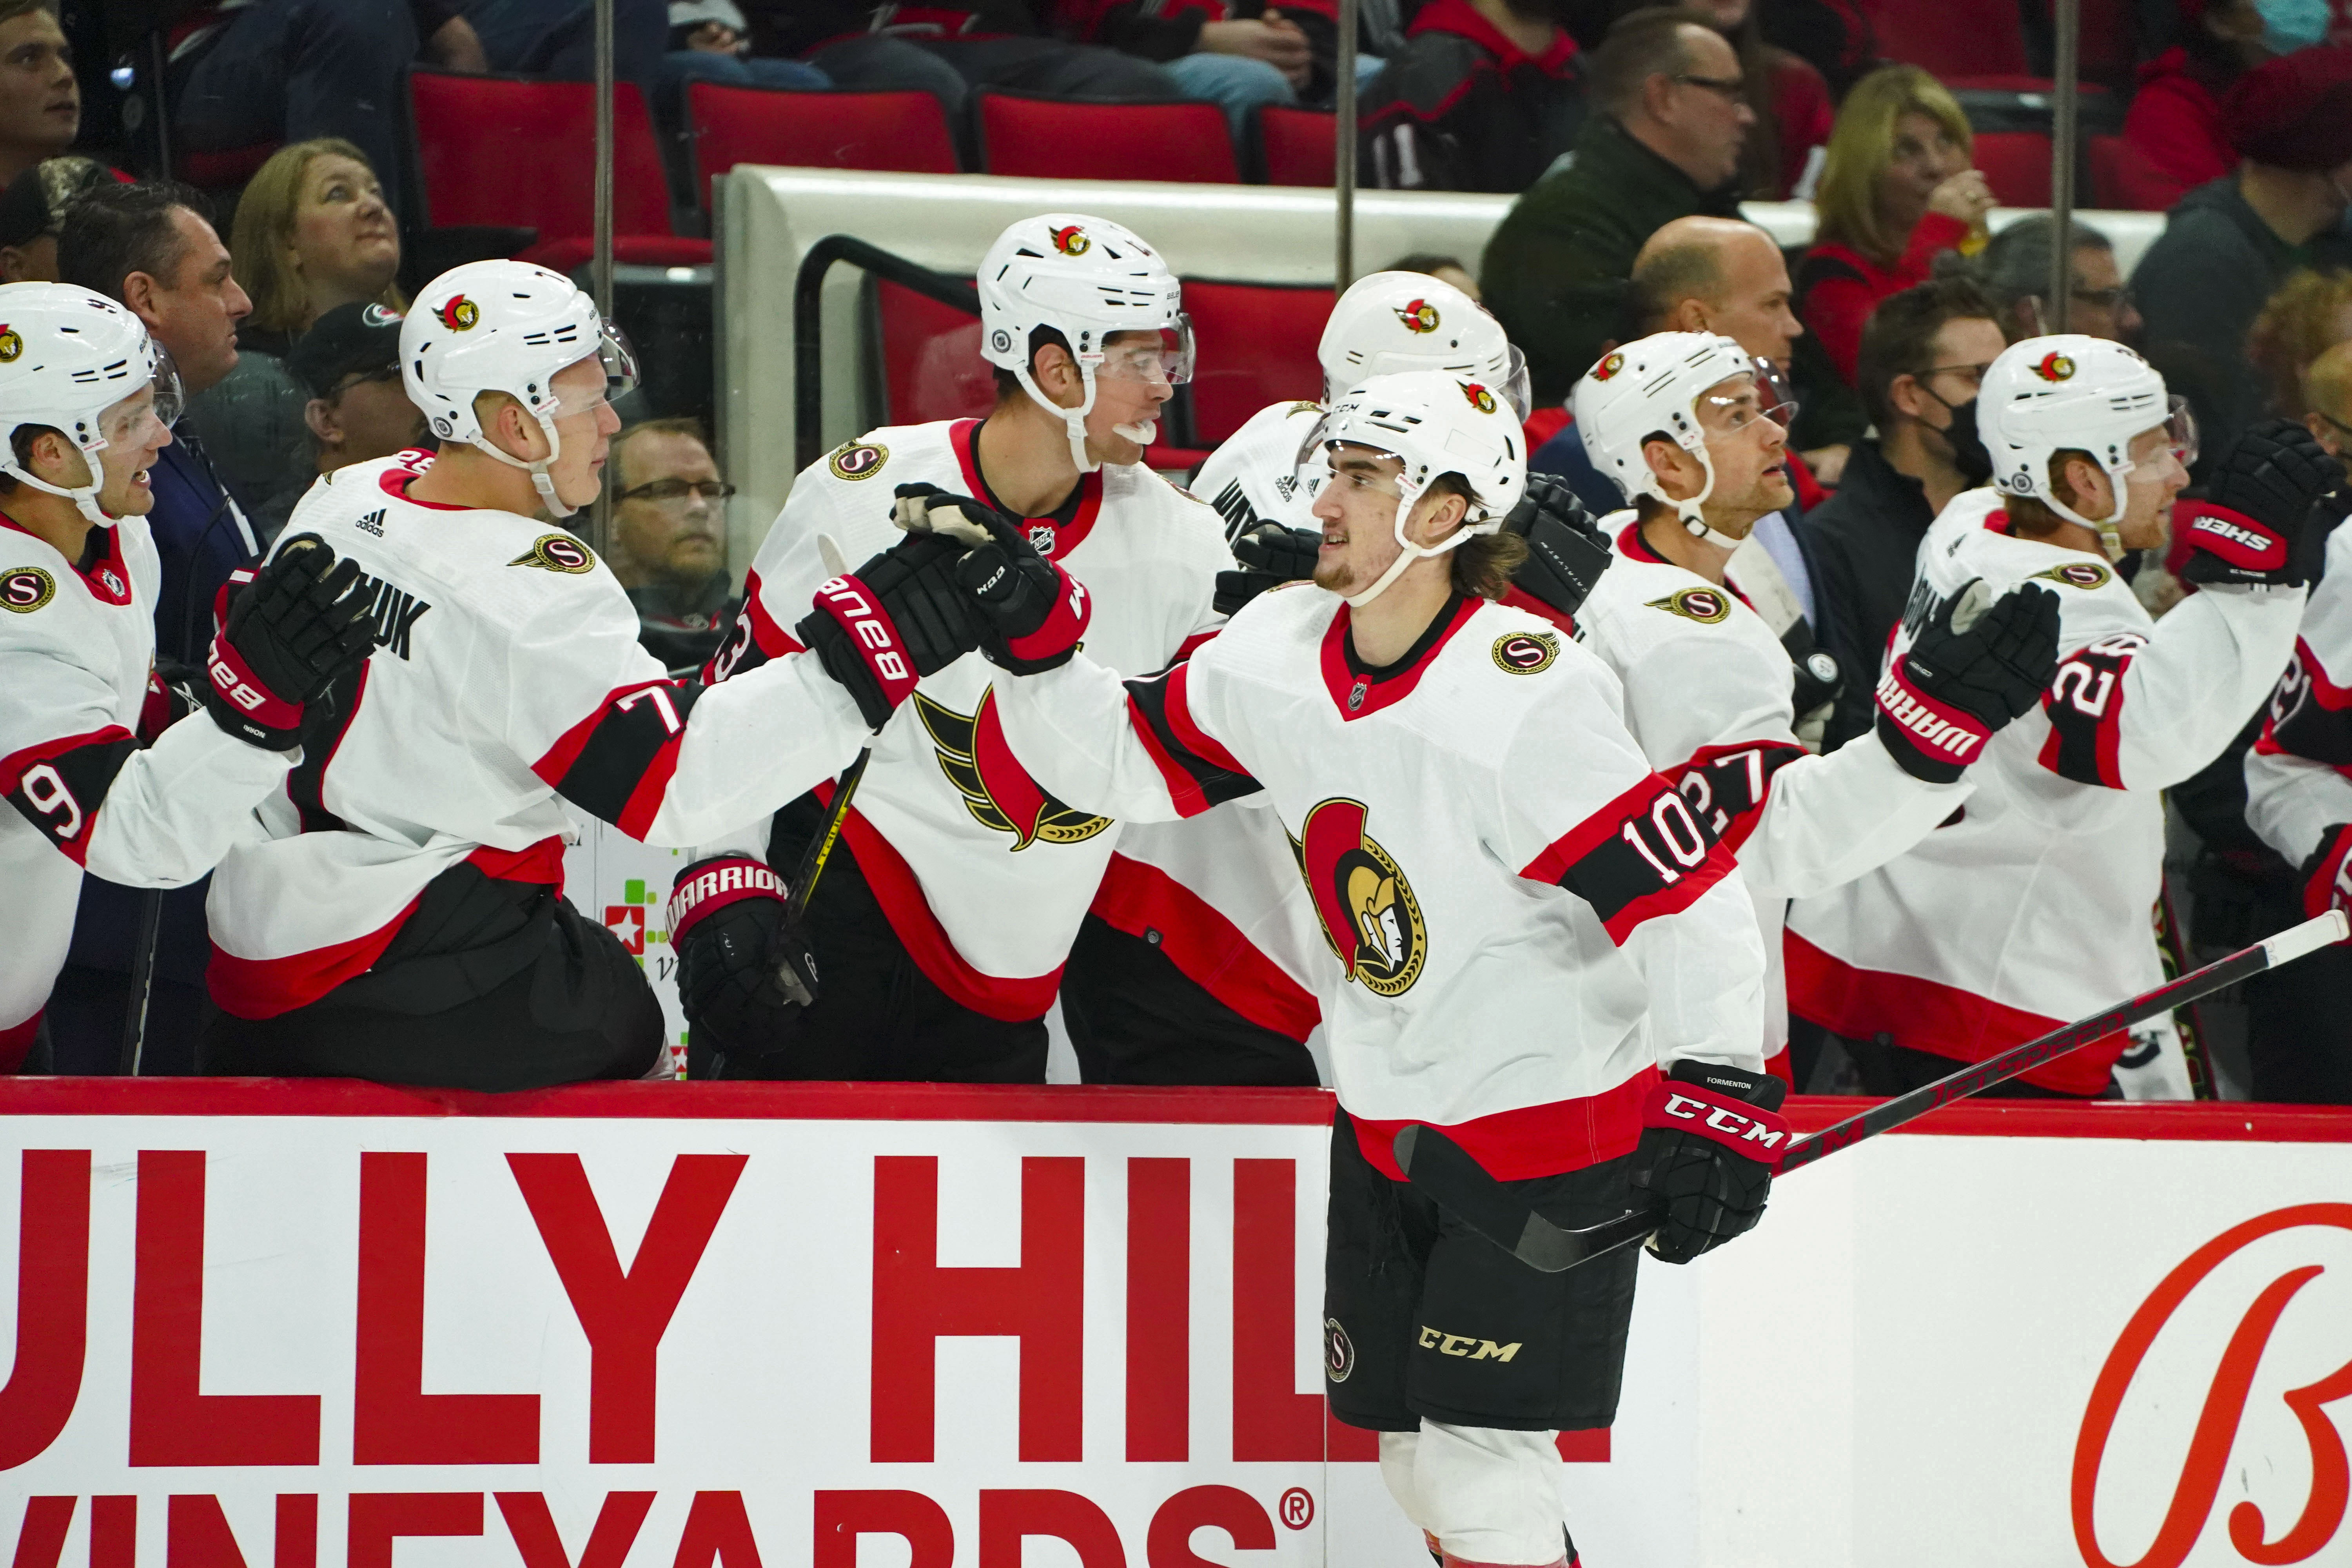 Dec 2, 2021; Raleigh, North Carolina, USA;  Ottawa Senators left wing Alex Formenton (10) celebrates his goal against the Carolina Hurricanes during the first period at PNC Arena. Mandatory Credit: James Guillory-USA TODAY Sports